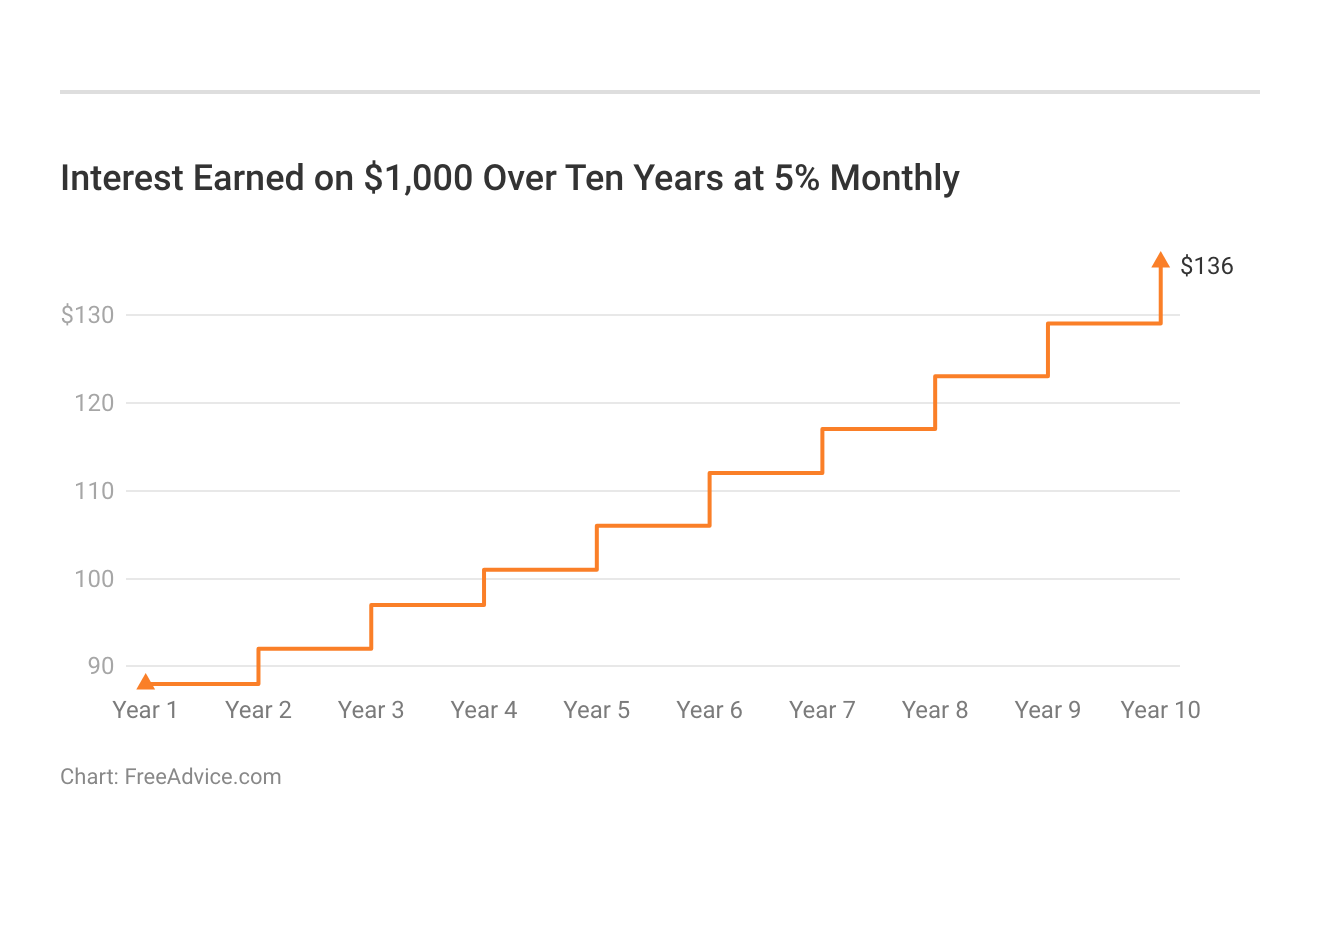 <h3>Interest Earned on $1,000 Over Ten Years at 5% Monthly</h3>